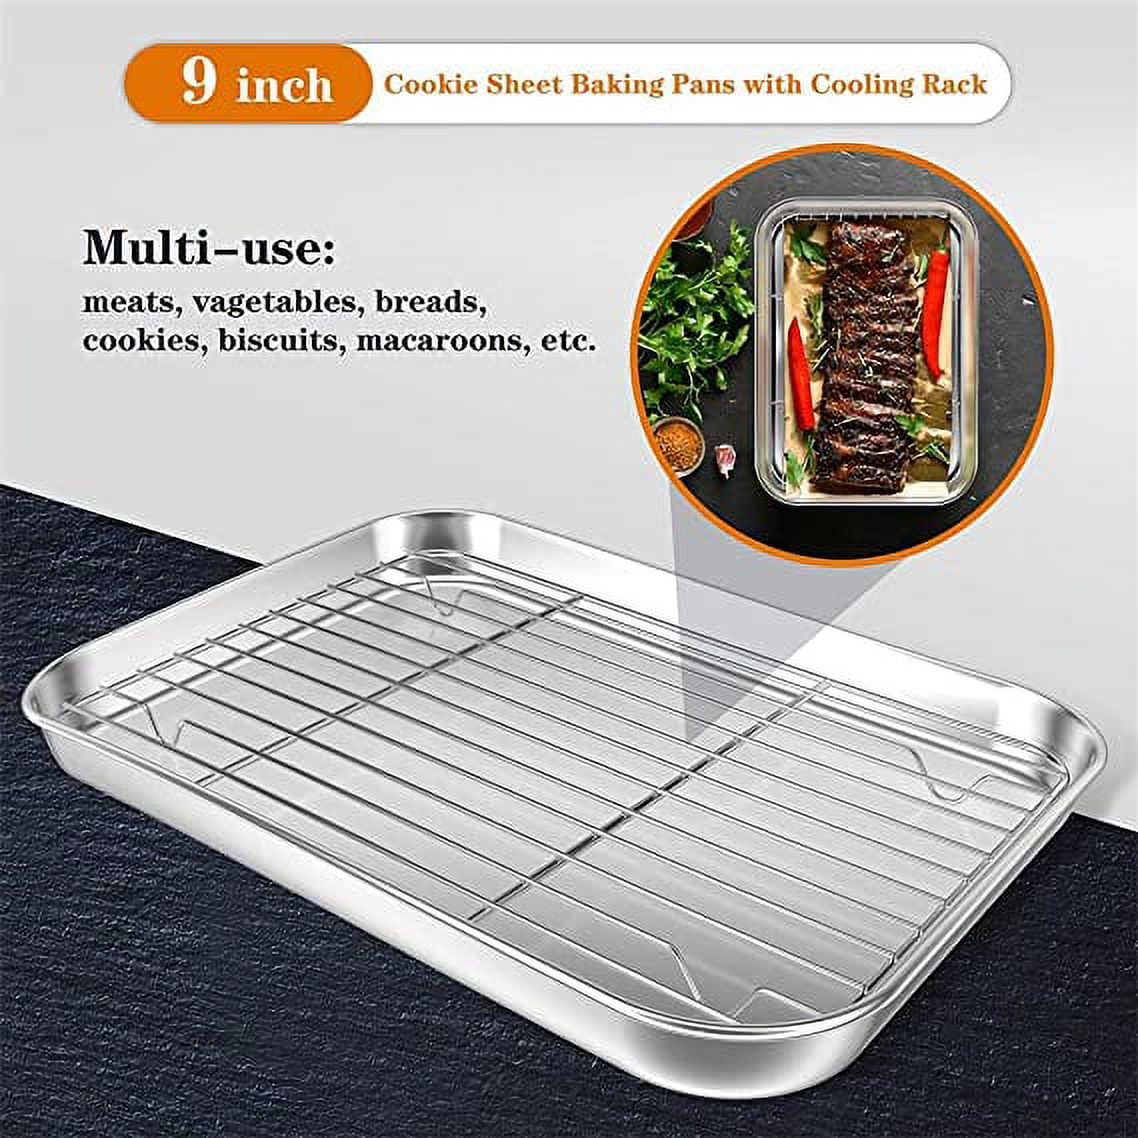 11 inch Baking Sheets Pan Nonstick Set of 2, Walooza 1-Inch Deep Baking Trays, 11x9 inch Cookie Sheet Replacement Toaster Oven Tray, Non Toxic & Heavy